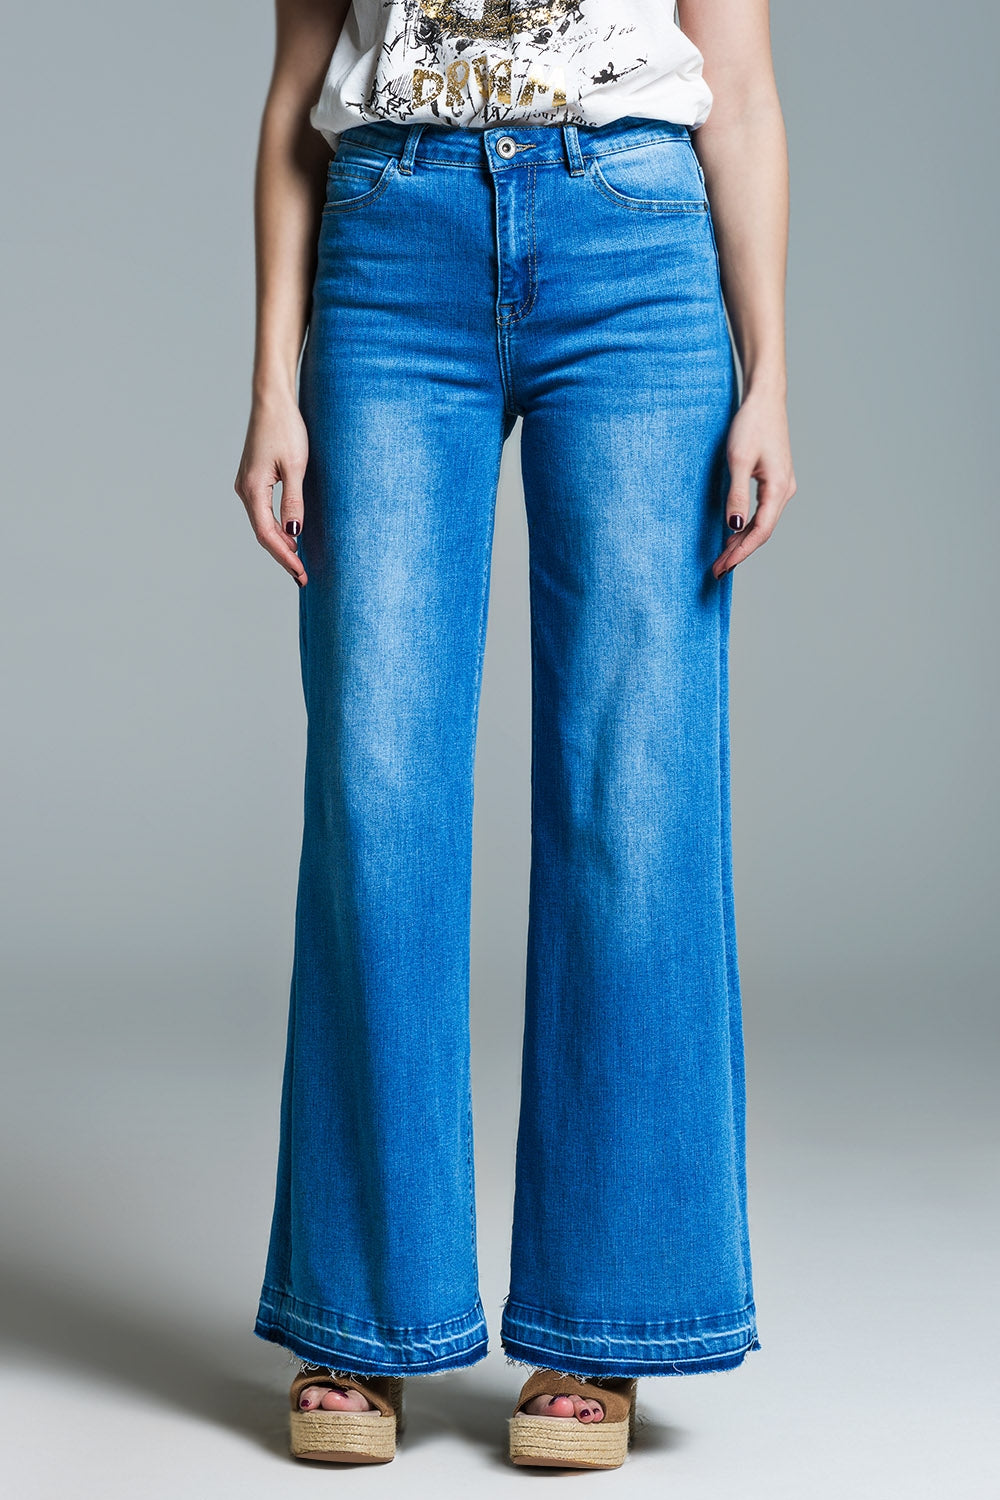 Q2 Palazzo Style Jeans in Mid Wash With Double Stitching Detail at The Hem